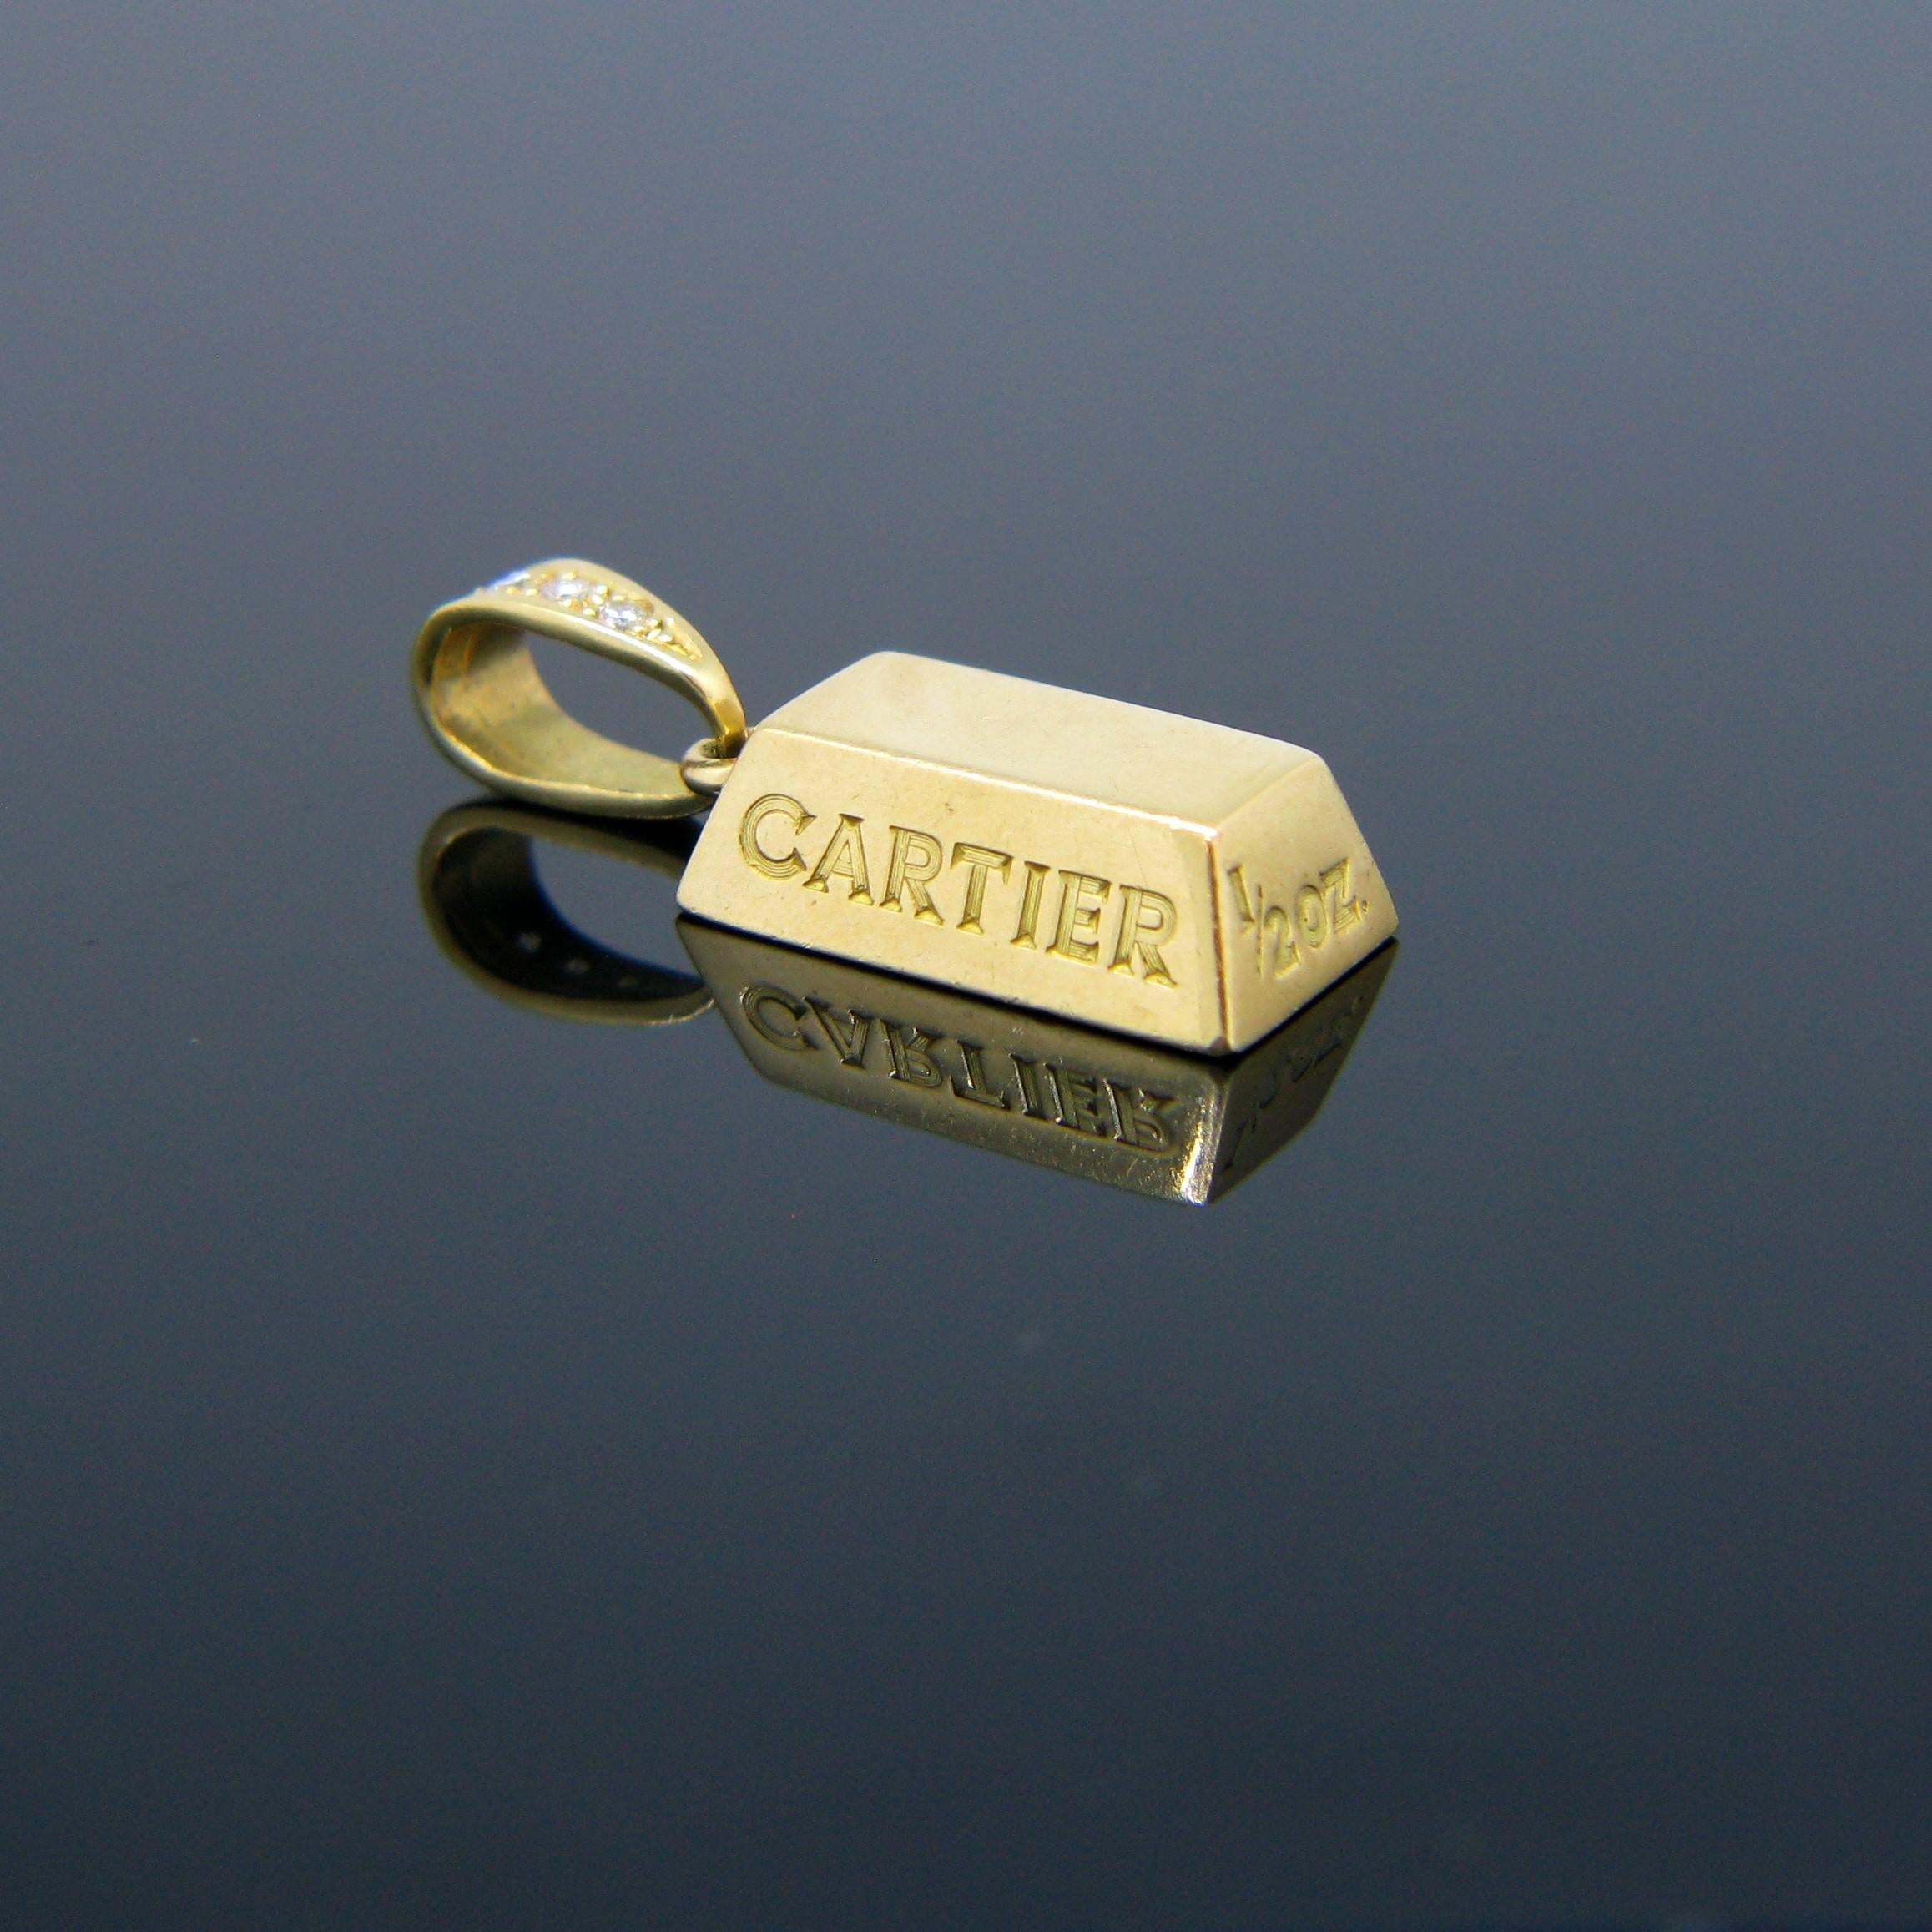 This pendant signed Cartier is a half-ounce gold bar or ingot. It is fully made in 18kt yellow gold. The bale is set with three round cut diamonds. It is signed and numbered Cartier 140592 at the back. It is also engraved with Cartier on one of the